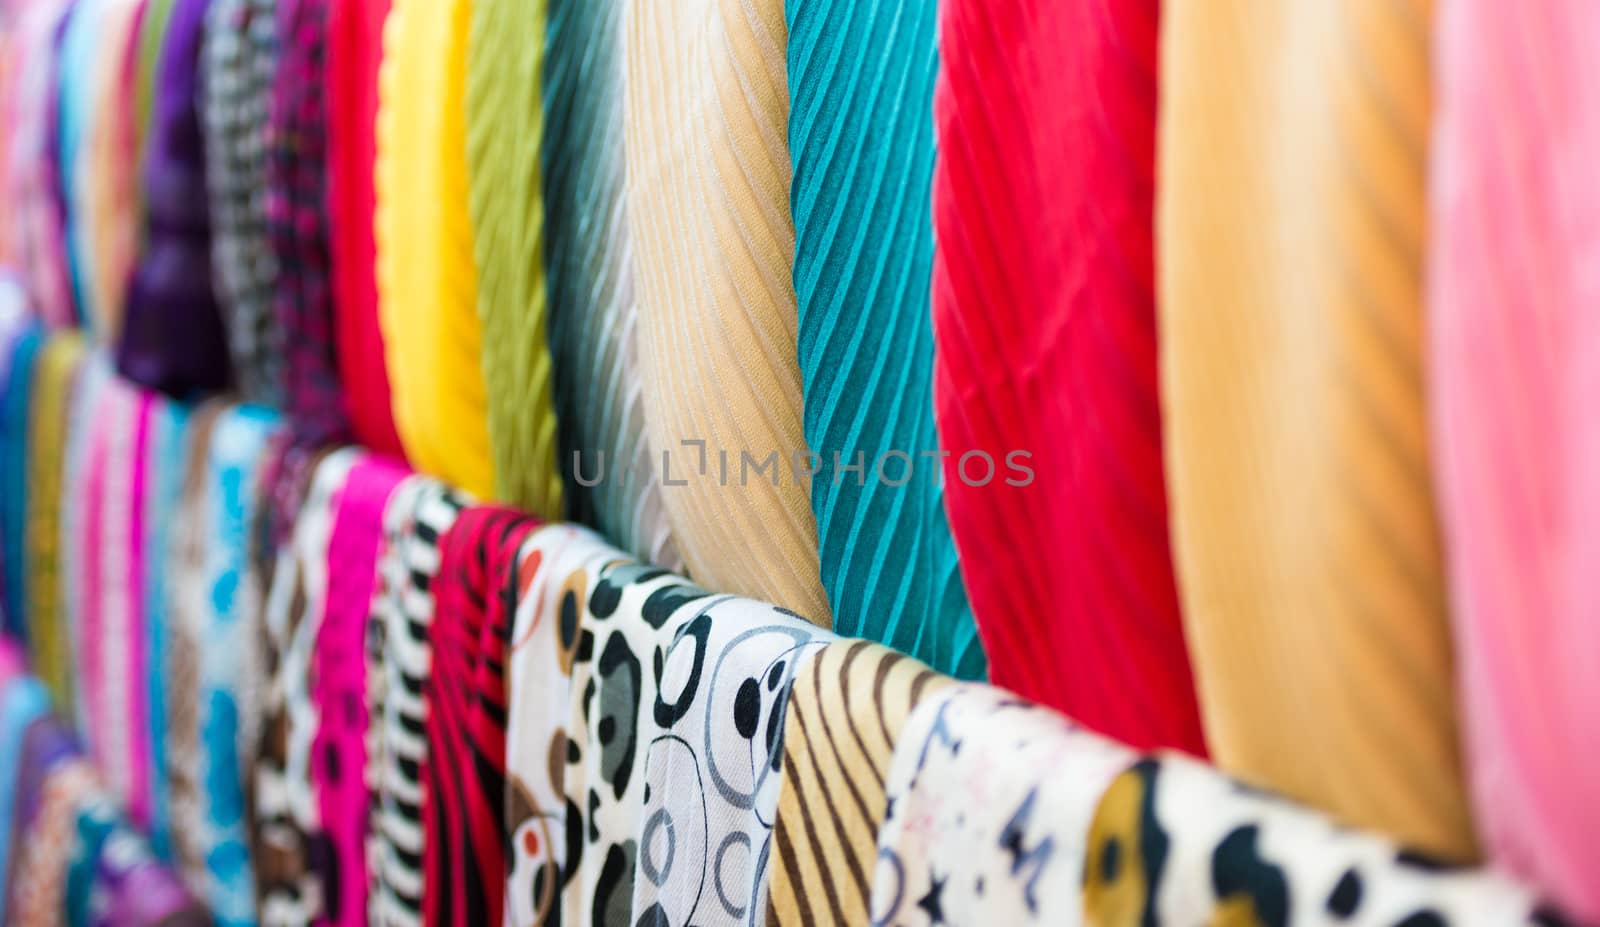 Close up view of colorful row of new scarves ready for sale at shop. Focus on blue and red ones. Going shopping and retail of casual clothes. Textiles and materials for sale. Trade and commerce.